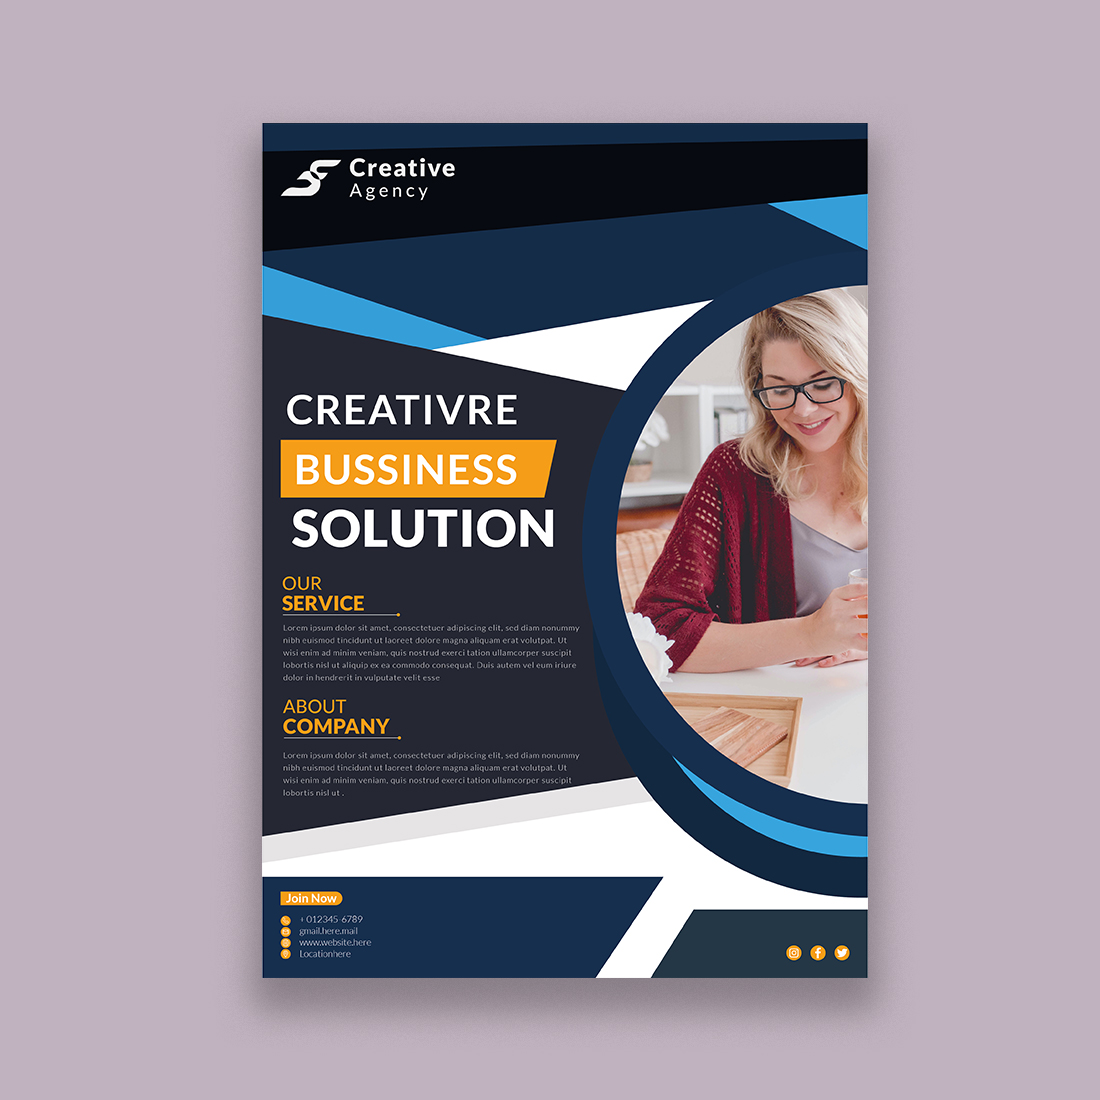 Corporate Flyer Design Template cover image.